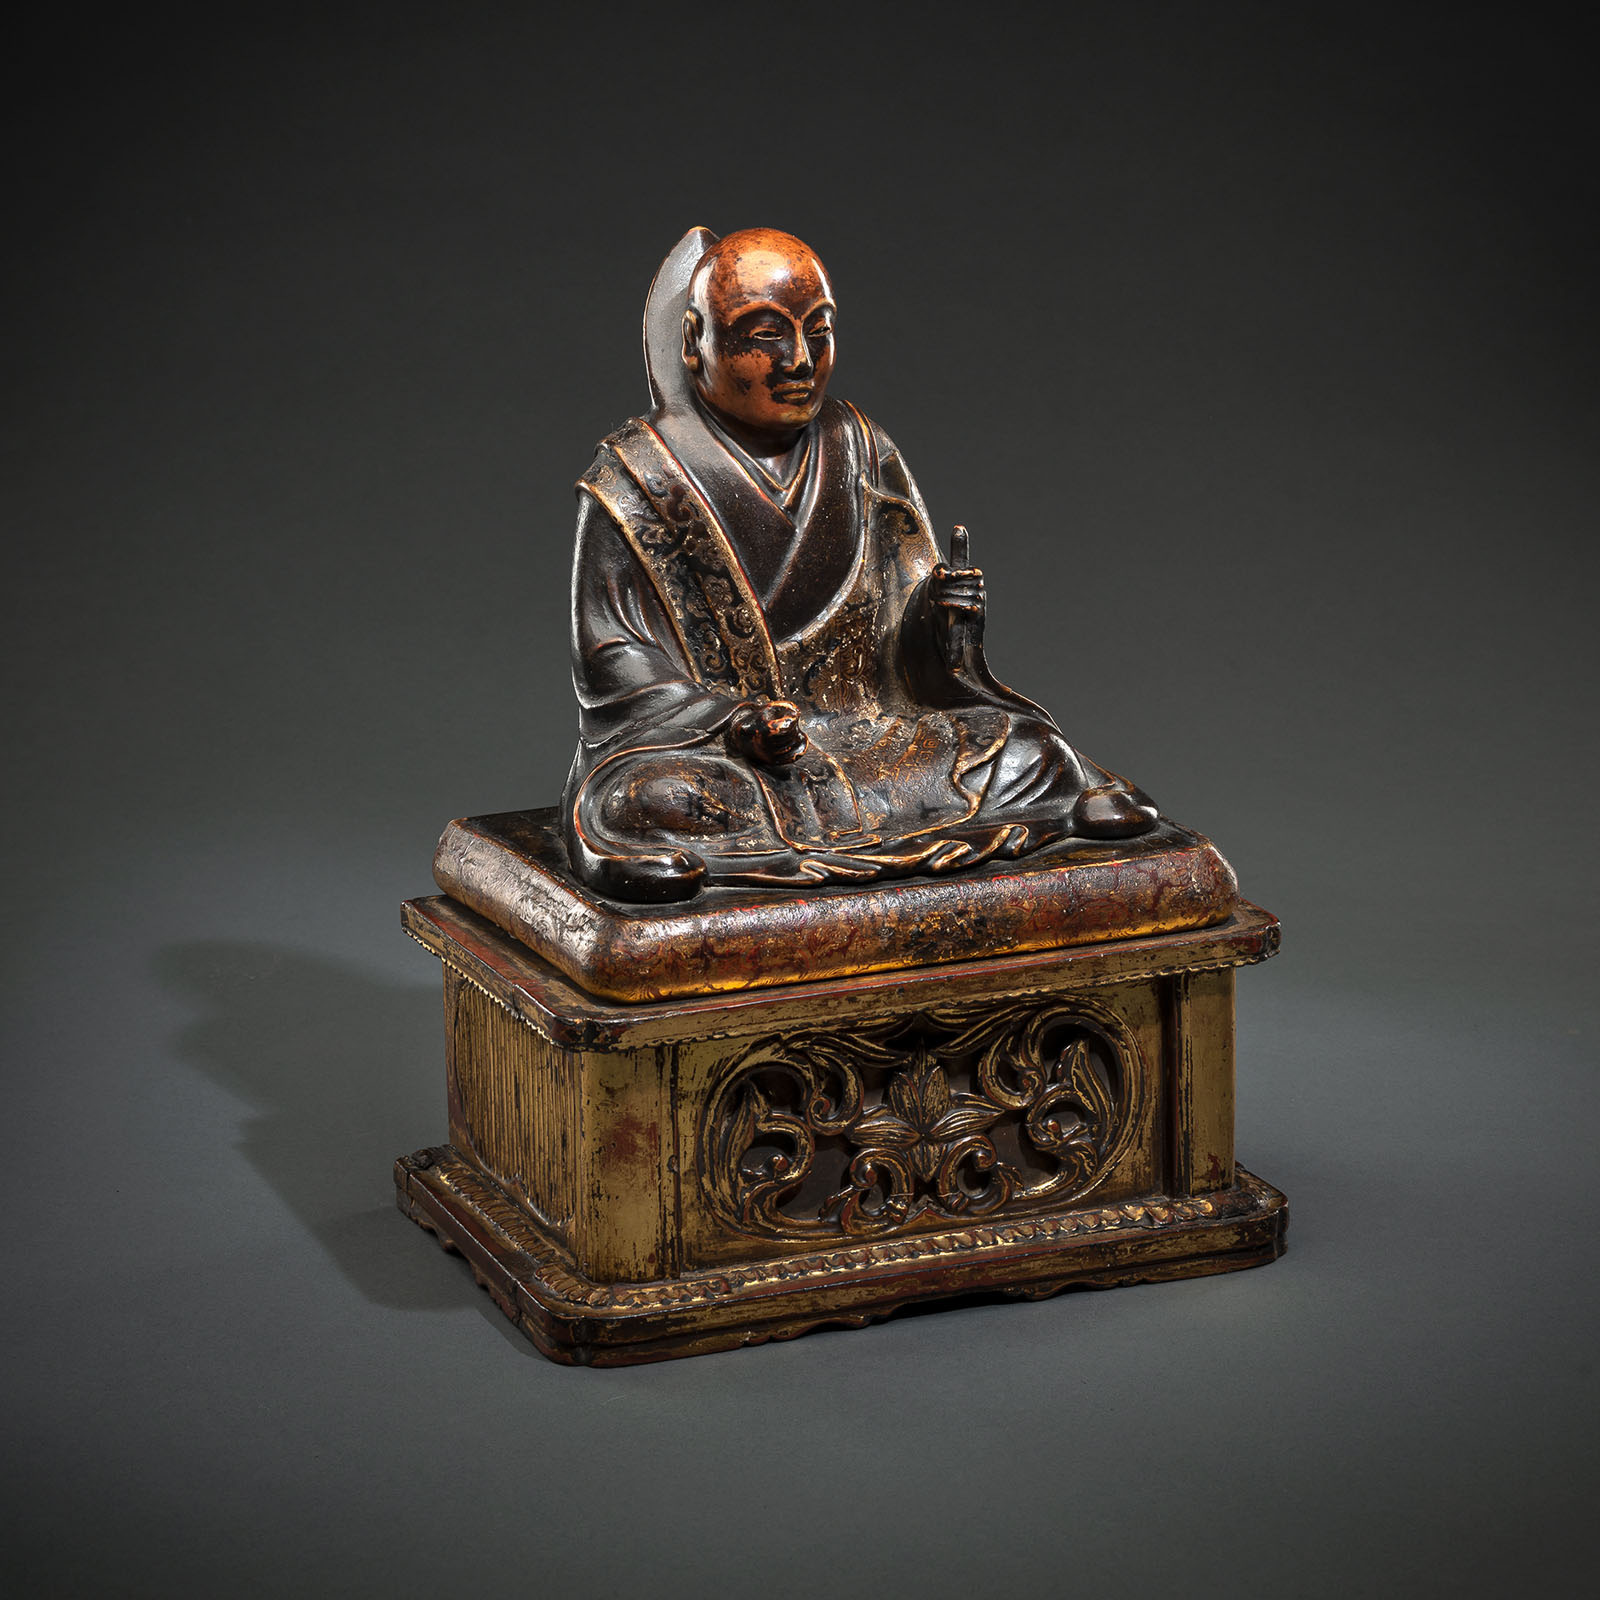 A LACQUERED AND PAINTED WOOD FIGURE OF NICHIREN SHÔNIN (1222 - 1282)